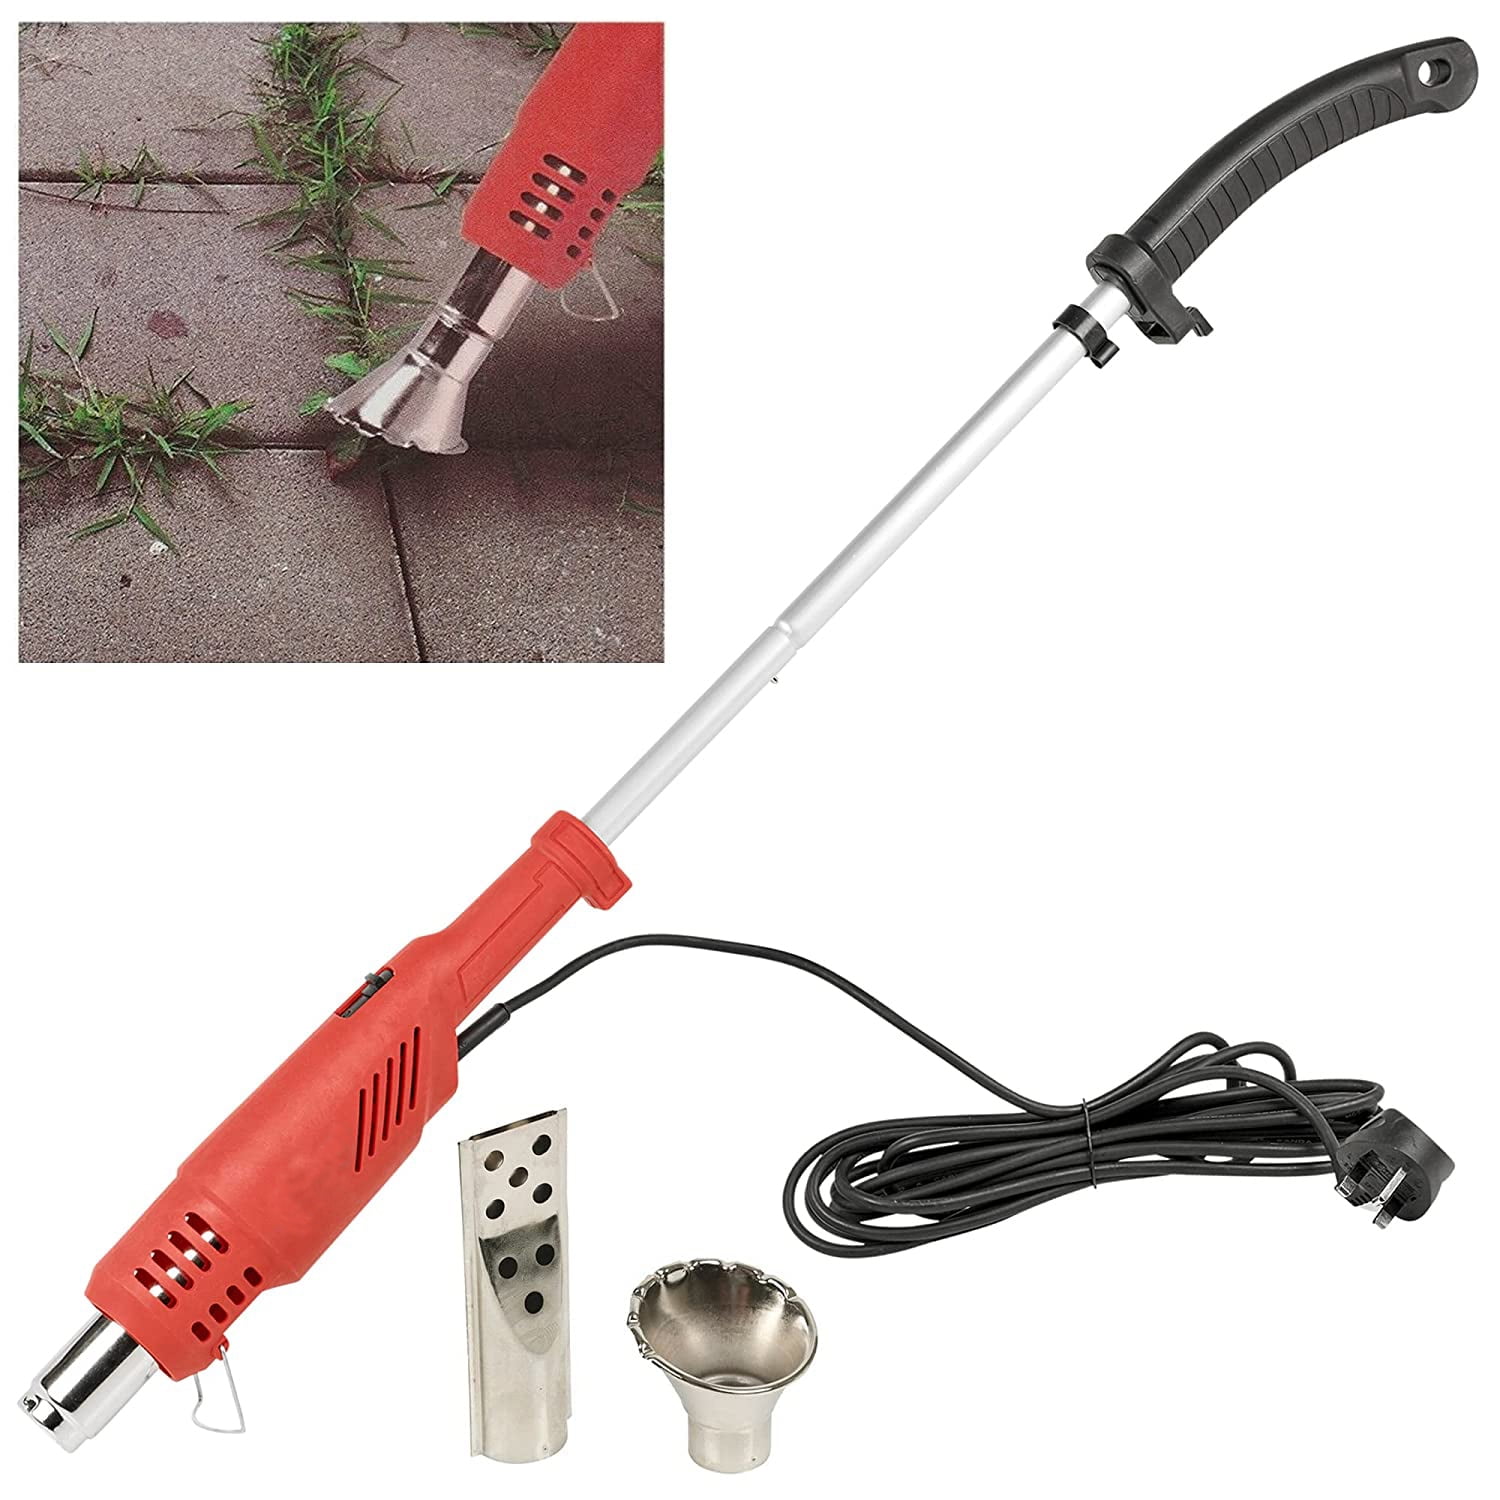 2000w Handheld Portable Weeding Torch darispony Electric Weed Burning Machine Weeding Machine The Highest Temperature Can Reach 1202°F（RED） 